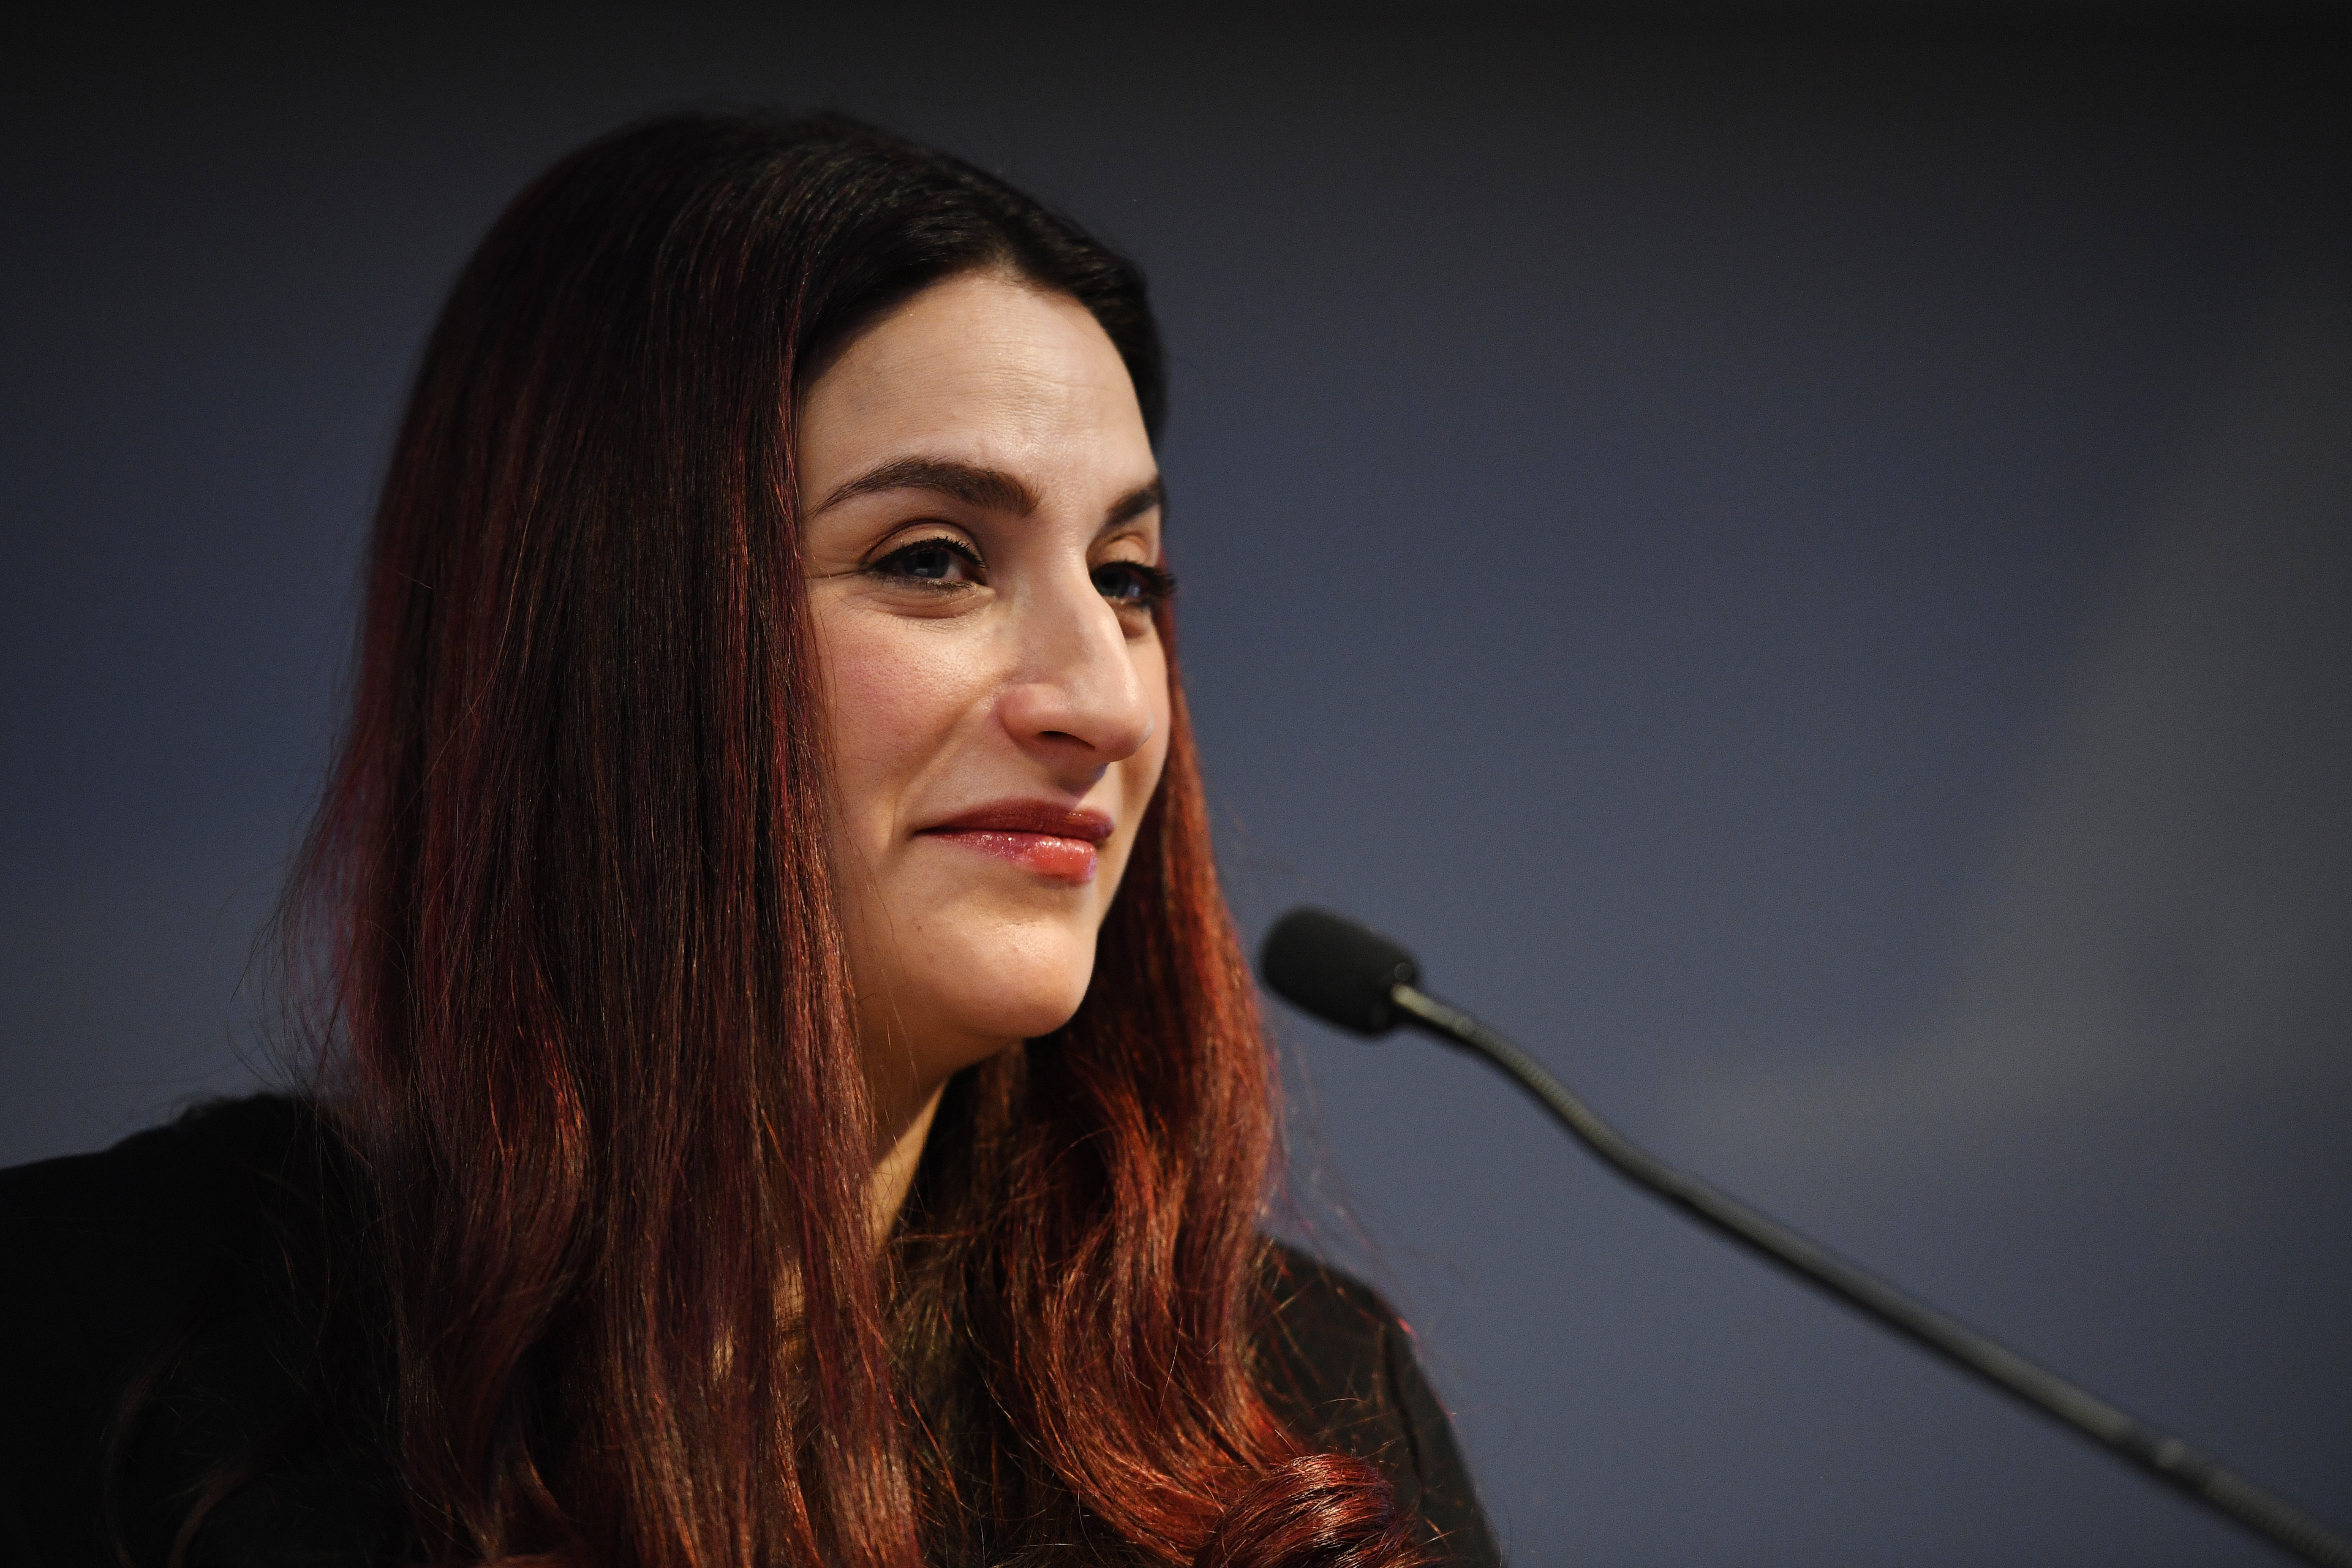 U.K. parliament member Luciana Berger announces her resignation from the Labour Party at a press conference in London, Feb. 18, 2019. (Leon Neal/Getty Images)